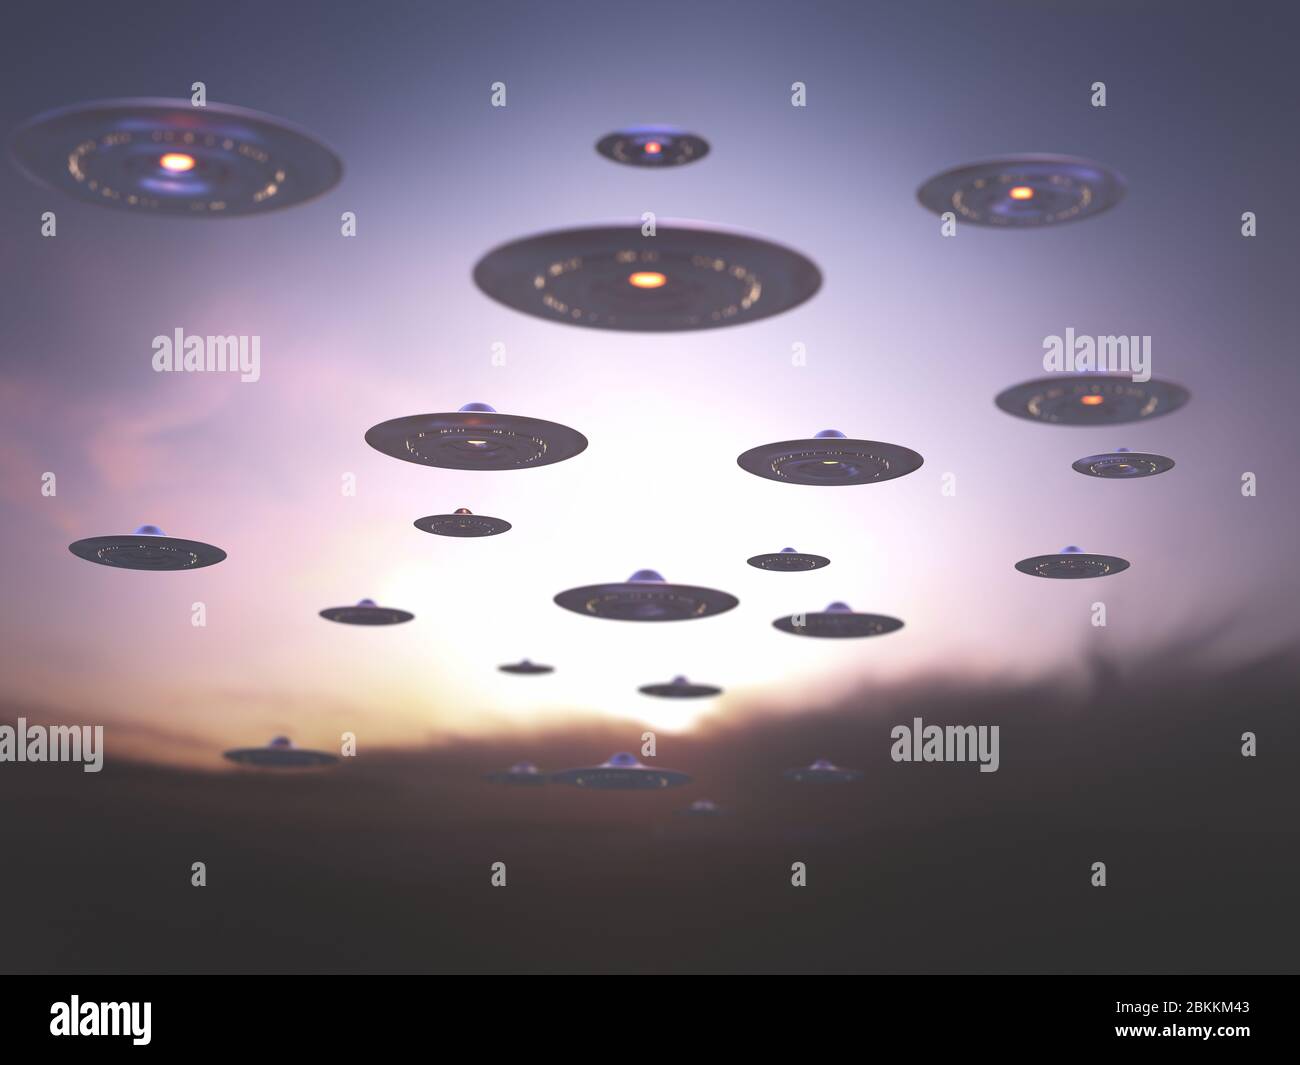 Invasion of alien spaceships under the sky at sunset. Stock Photo